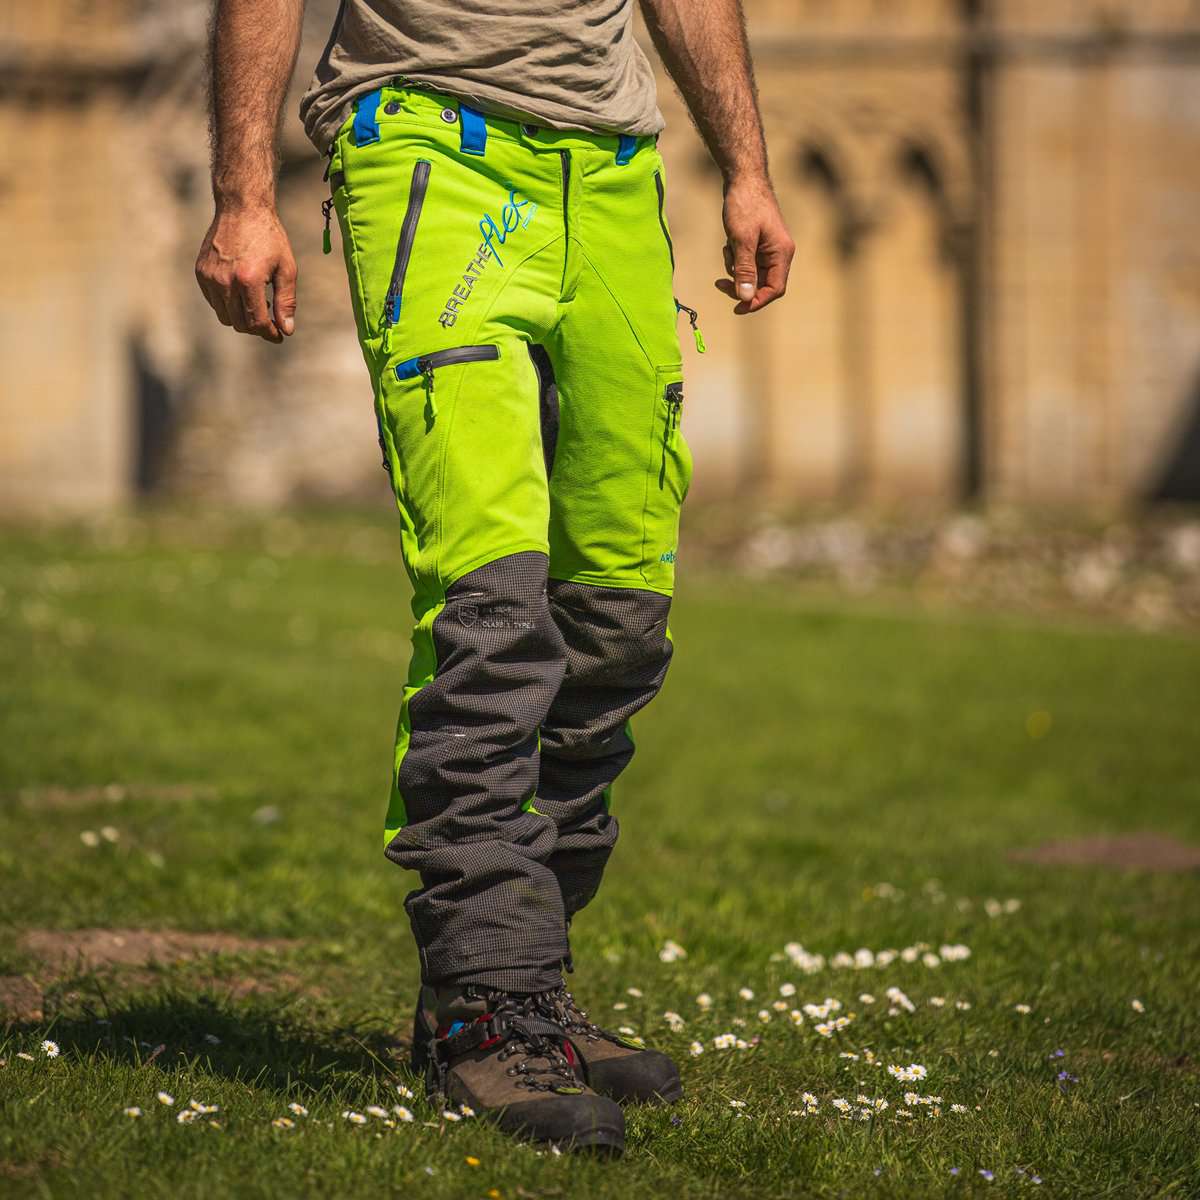 AT4070 Breatheflex Pro Type C Class 1 Chainsaw Trousers - Lime - Arbortec Forestwear